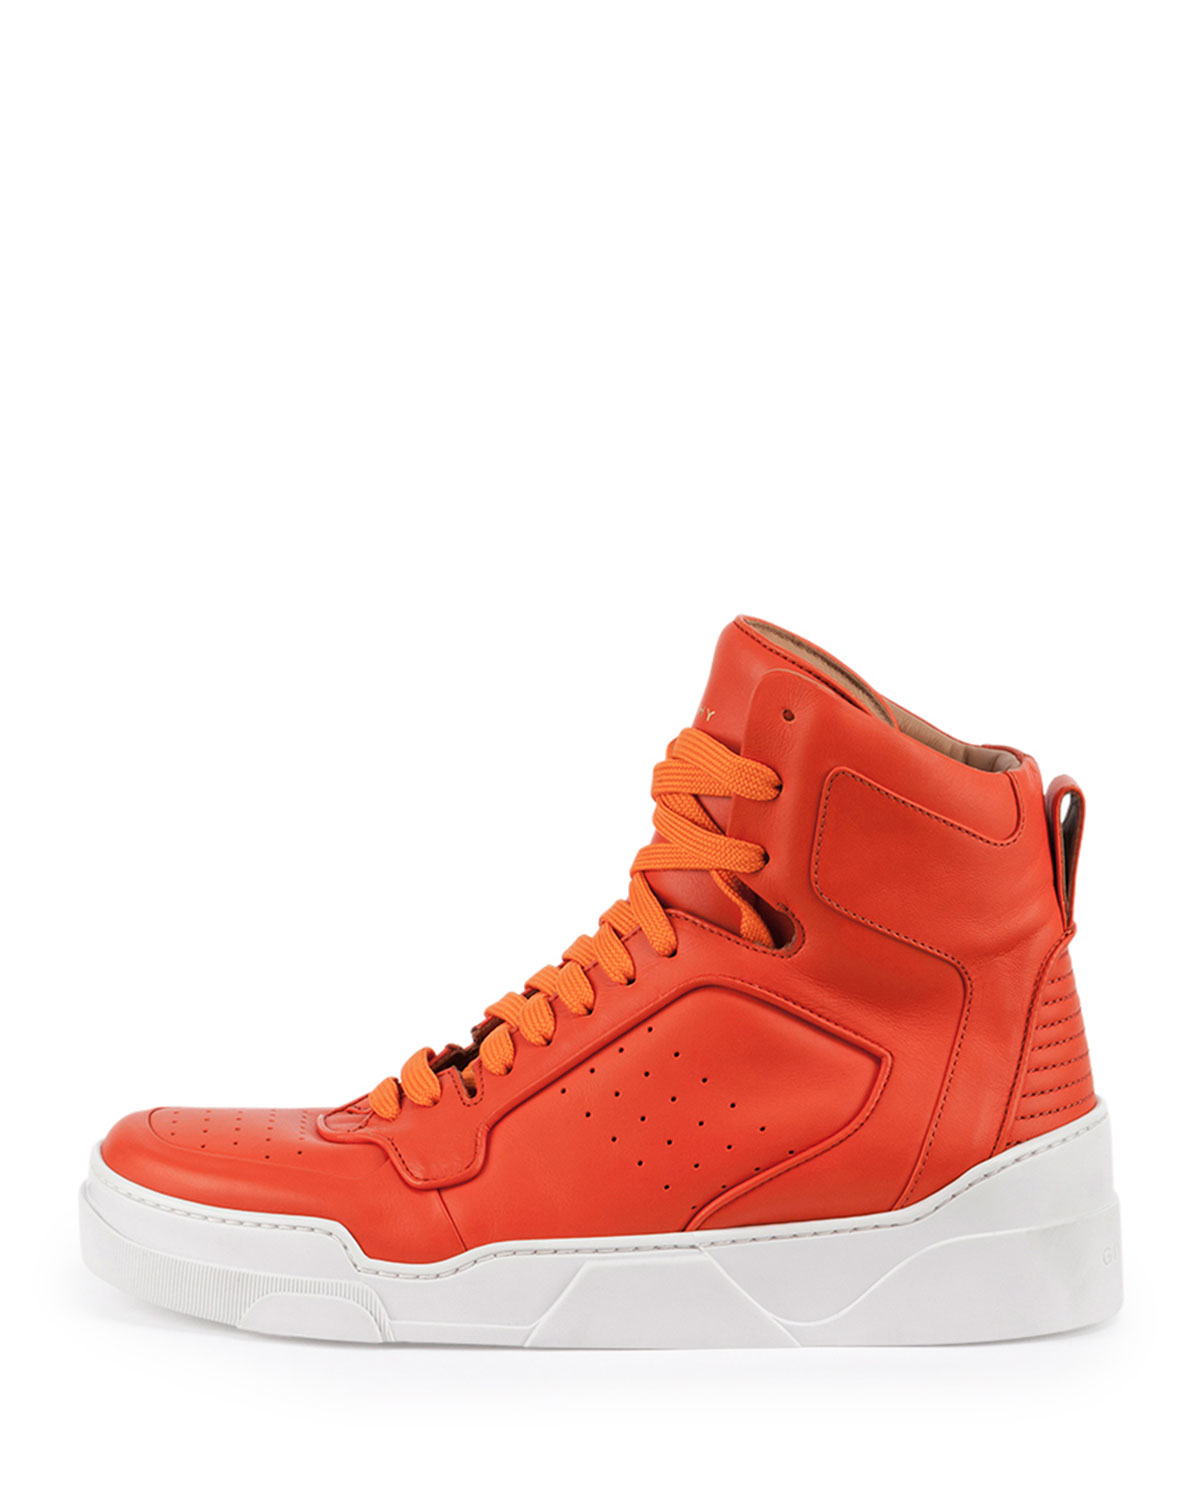 Givenchy Tyson Leather High-top Sneaker in Orange for Men | Lyst